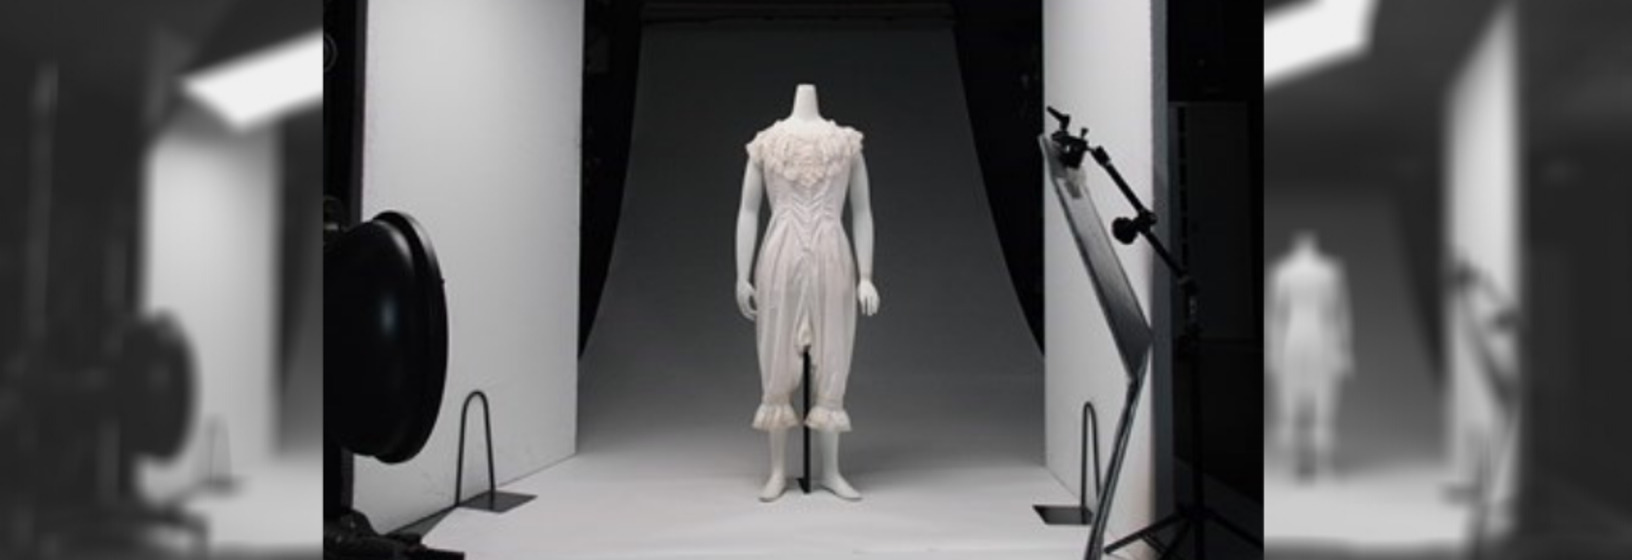 Collage of photography studio set showing lights, bounce boards and mannequin at NGV